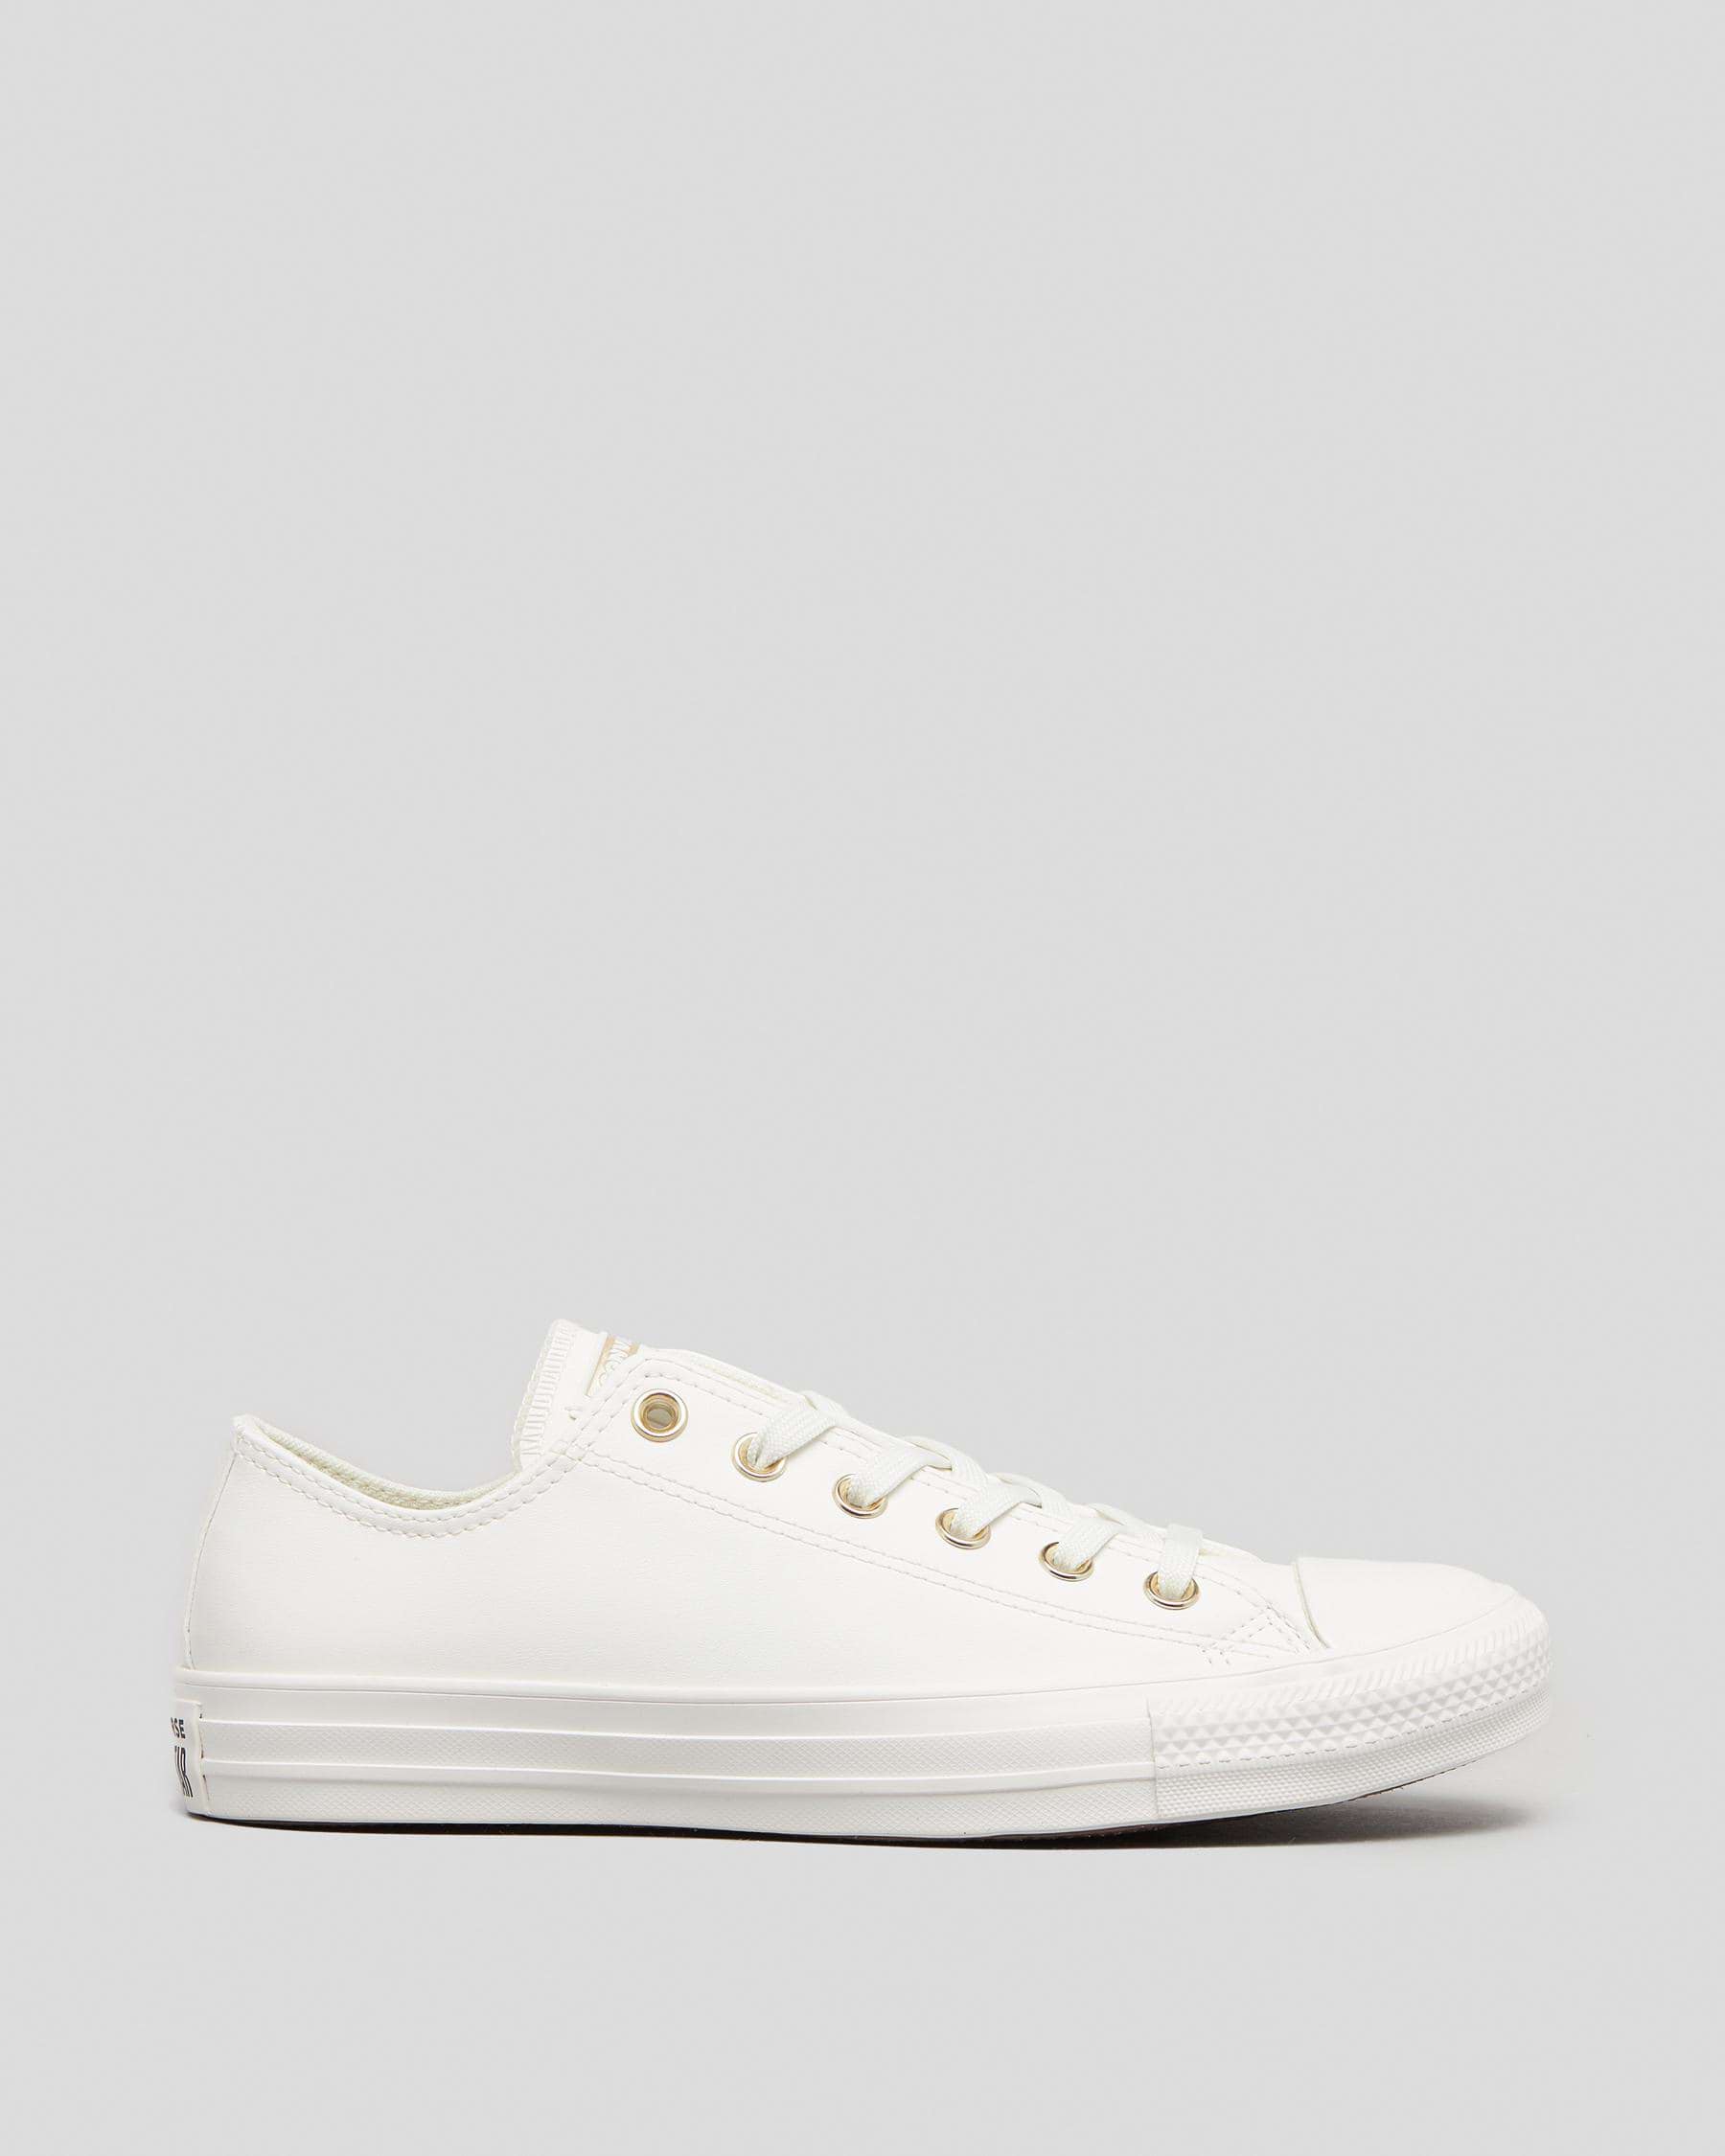 Converse Womens Chuck Taylor All Star Ox Shoes In Vintage White/vintage ...